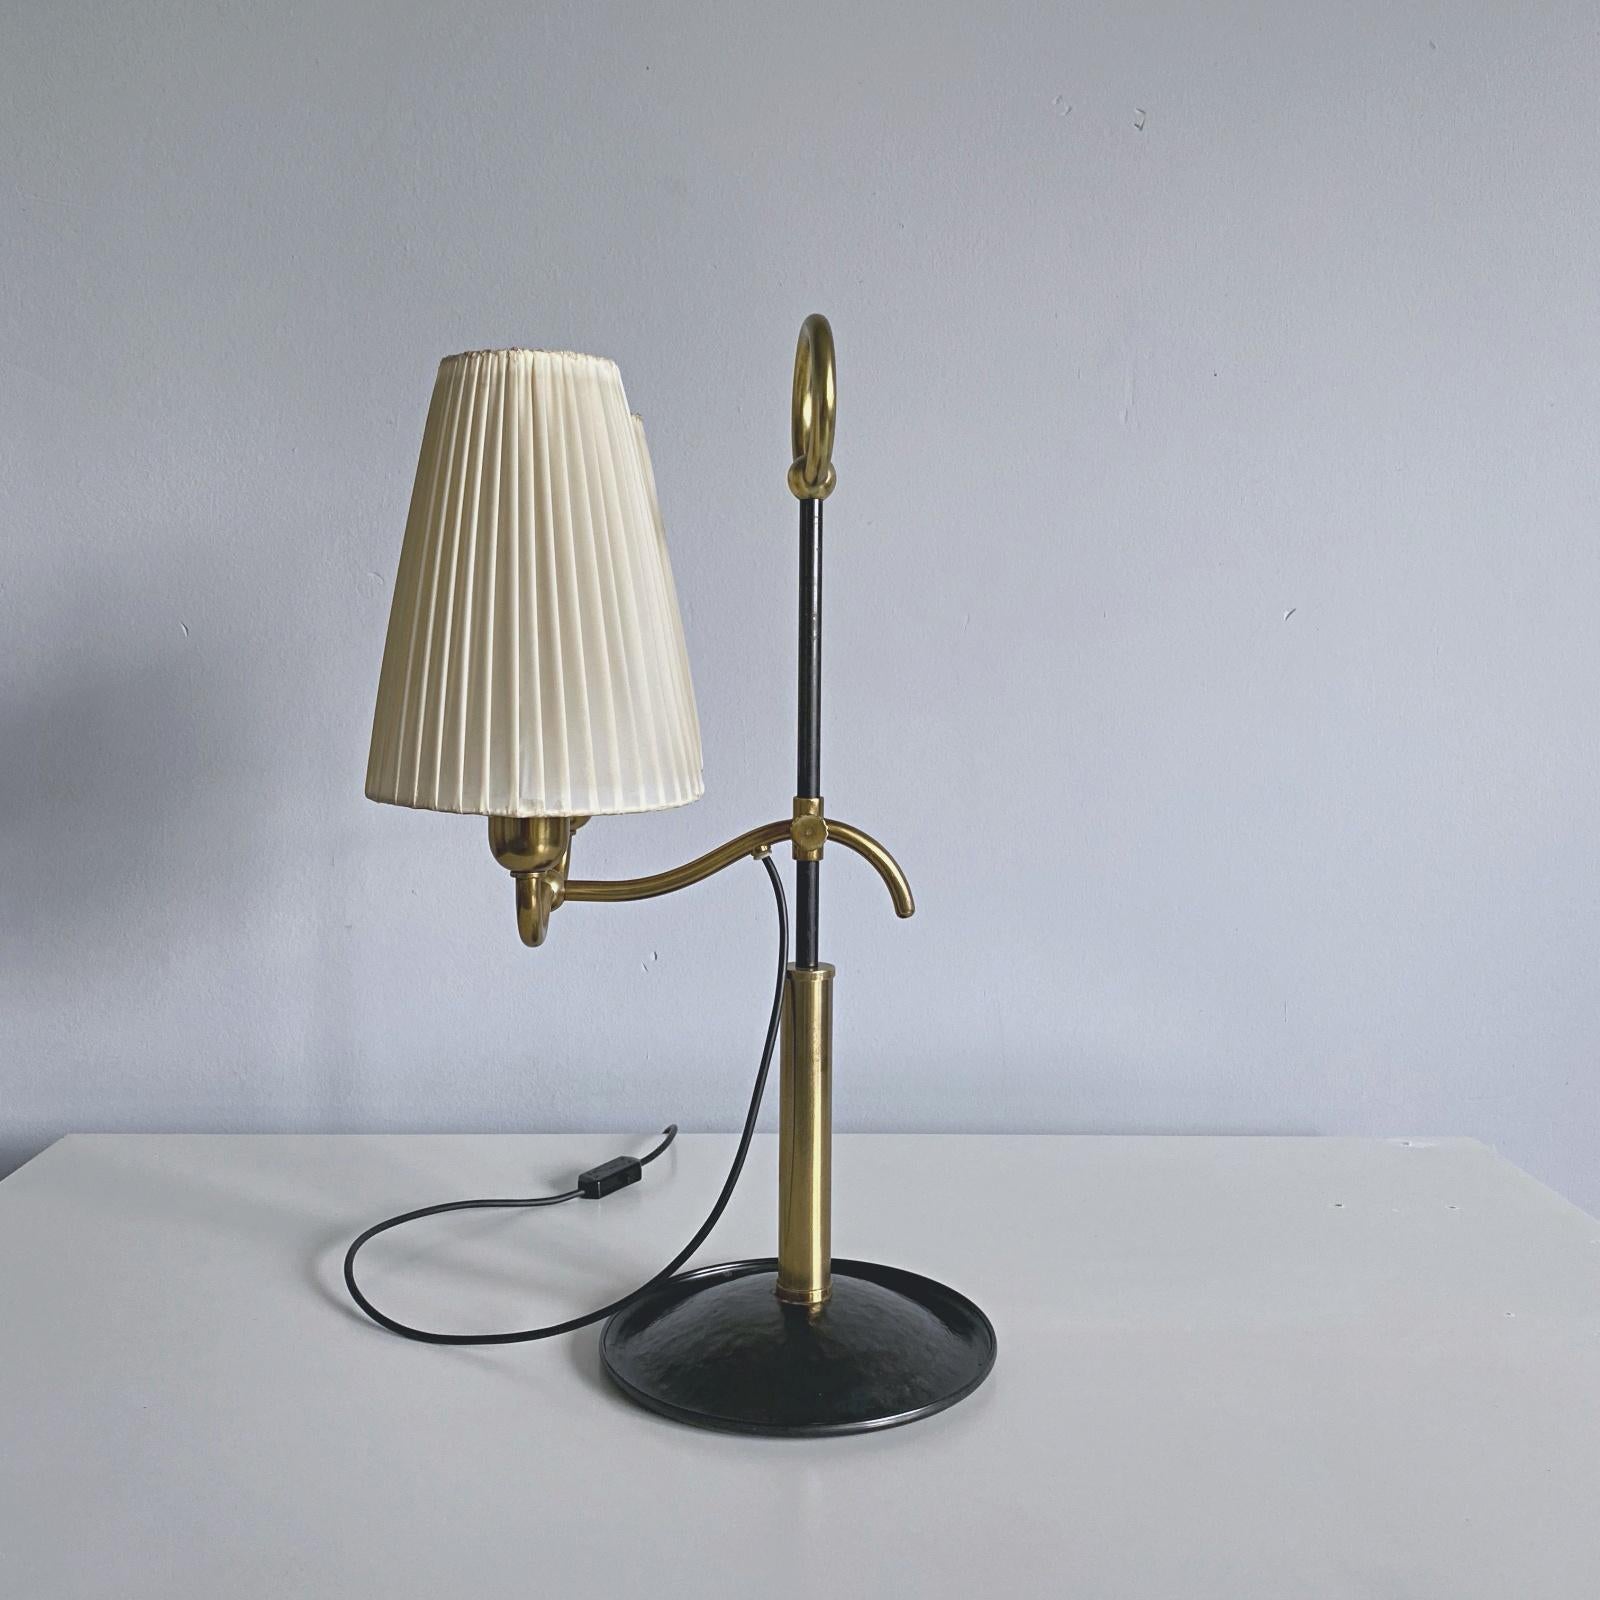 Vienna Secession Josef Frank Two Light Brass Table Lamp, Viennese Modern Age, Austria For Sale